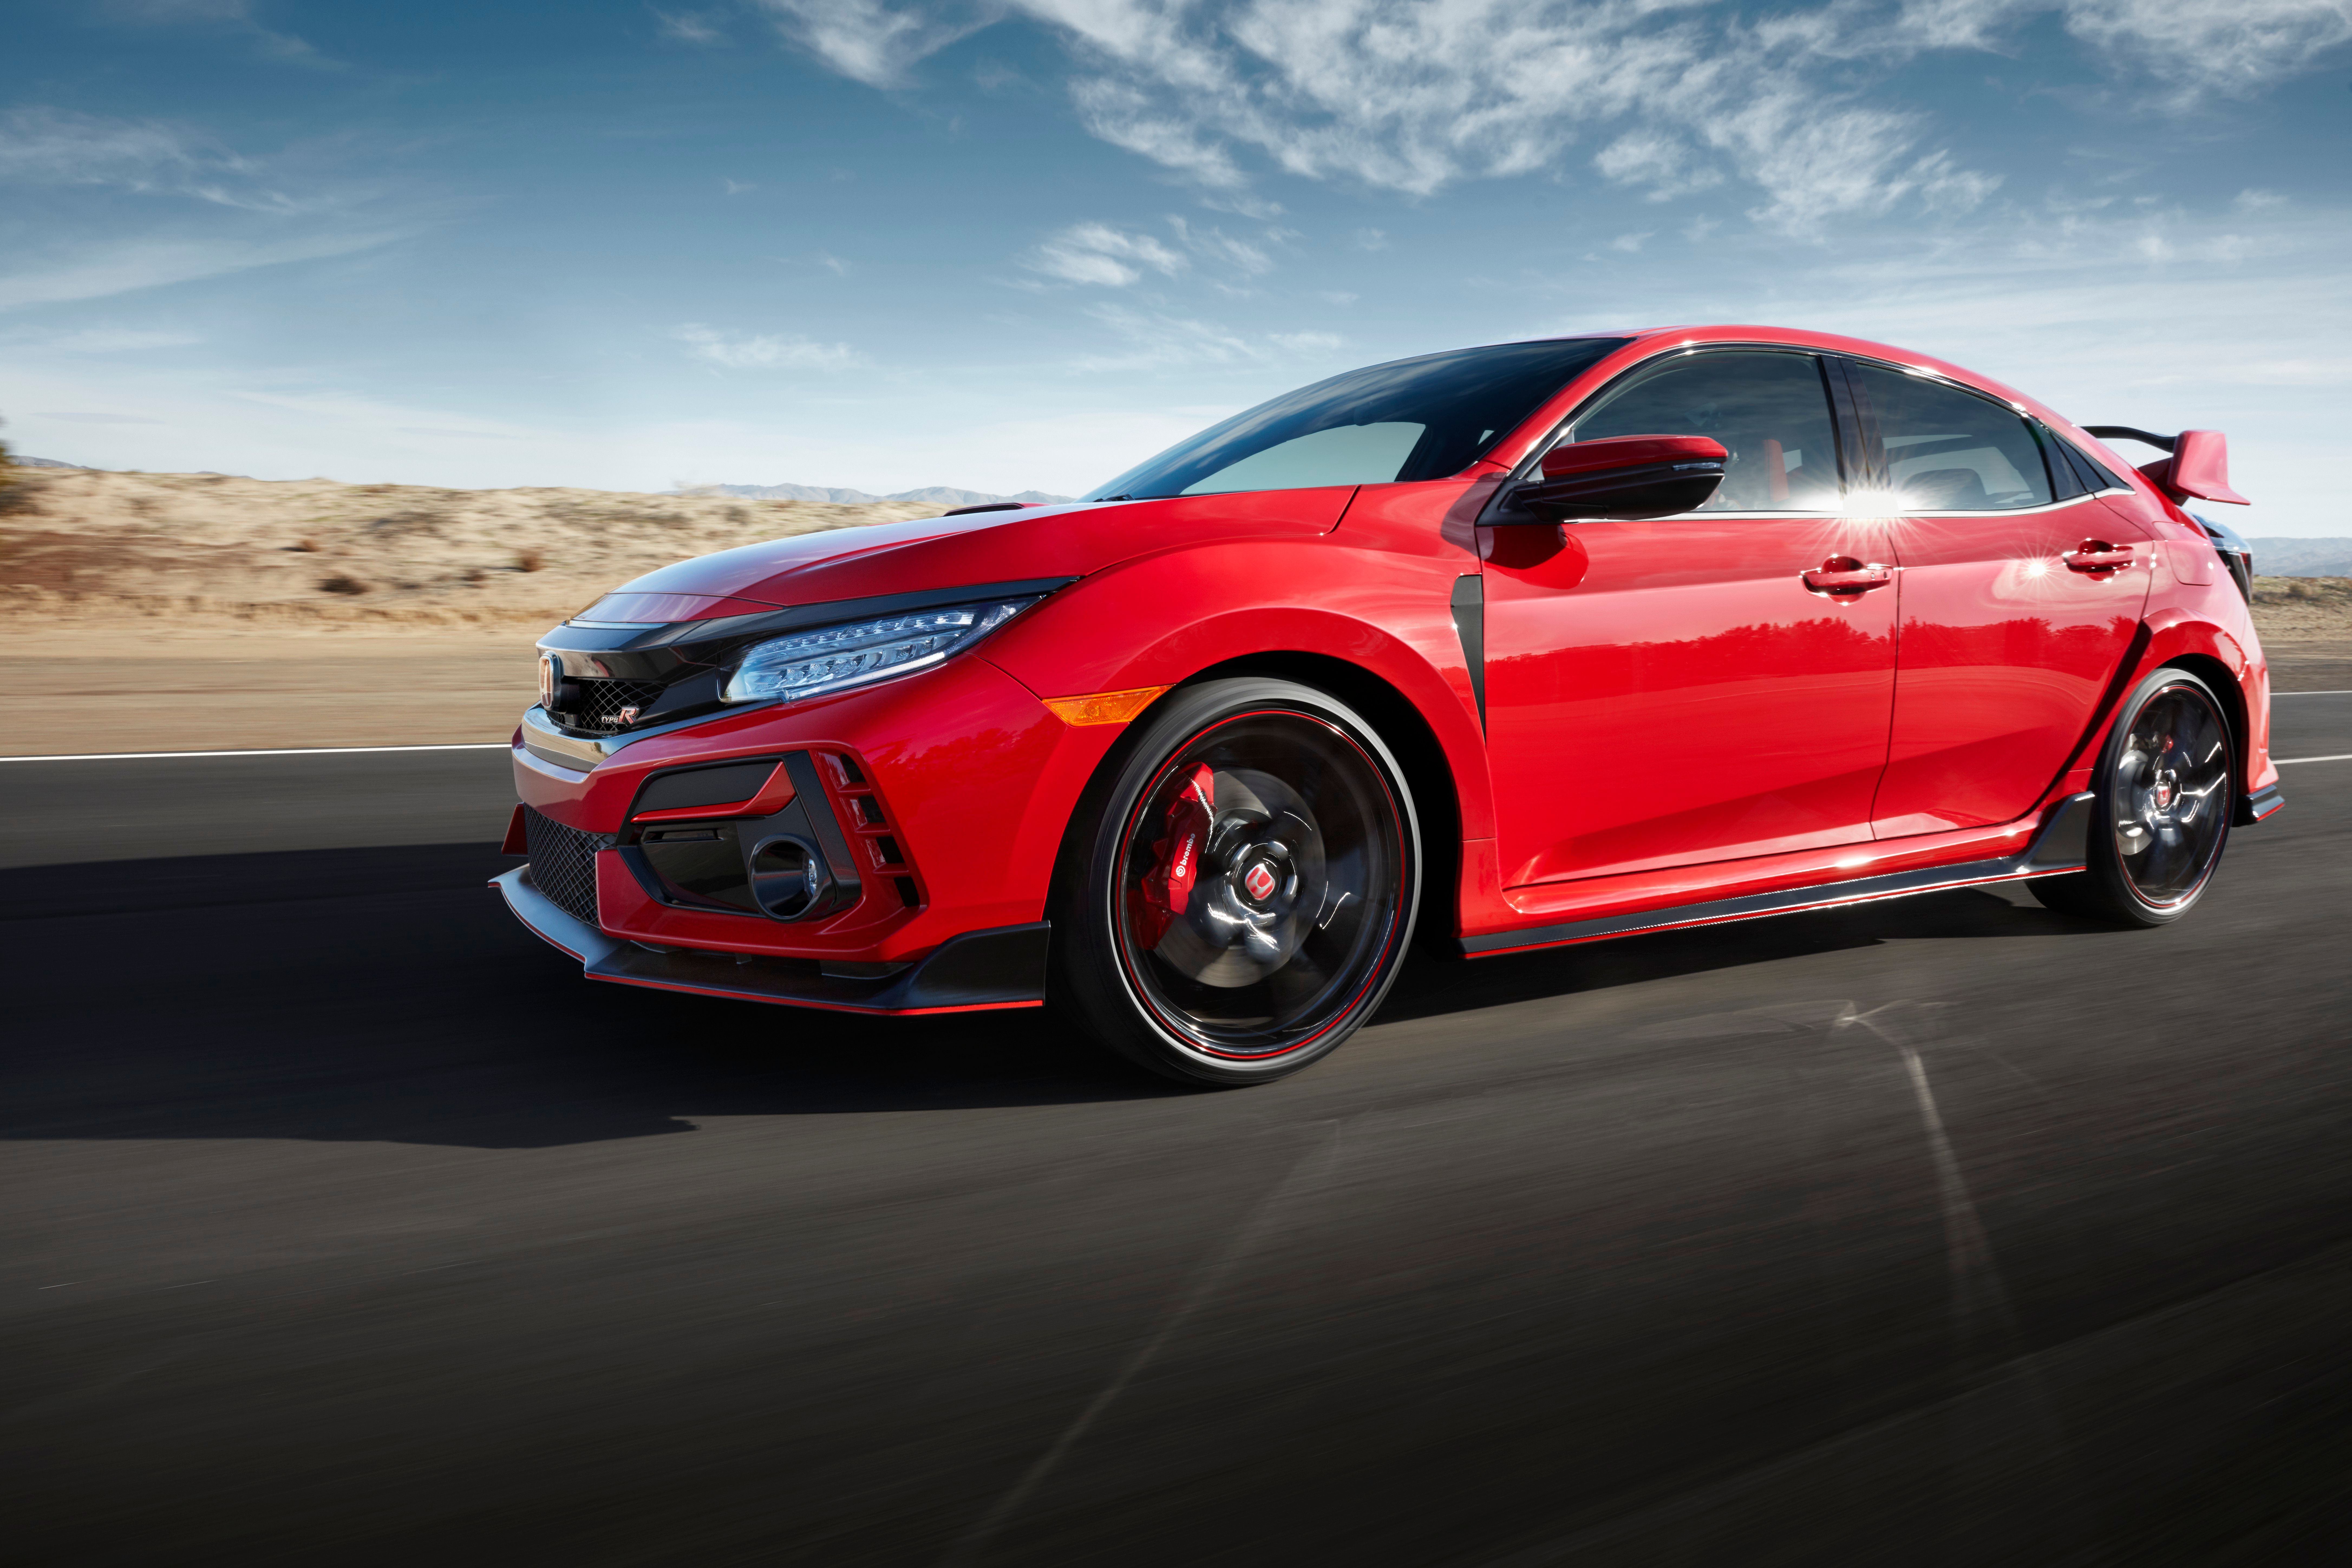 Civic Type R driving.